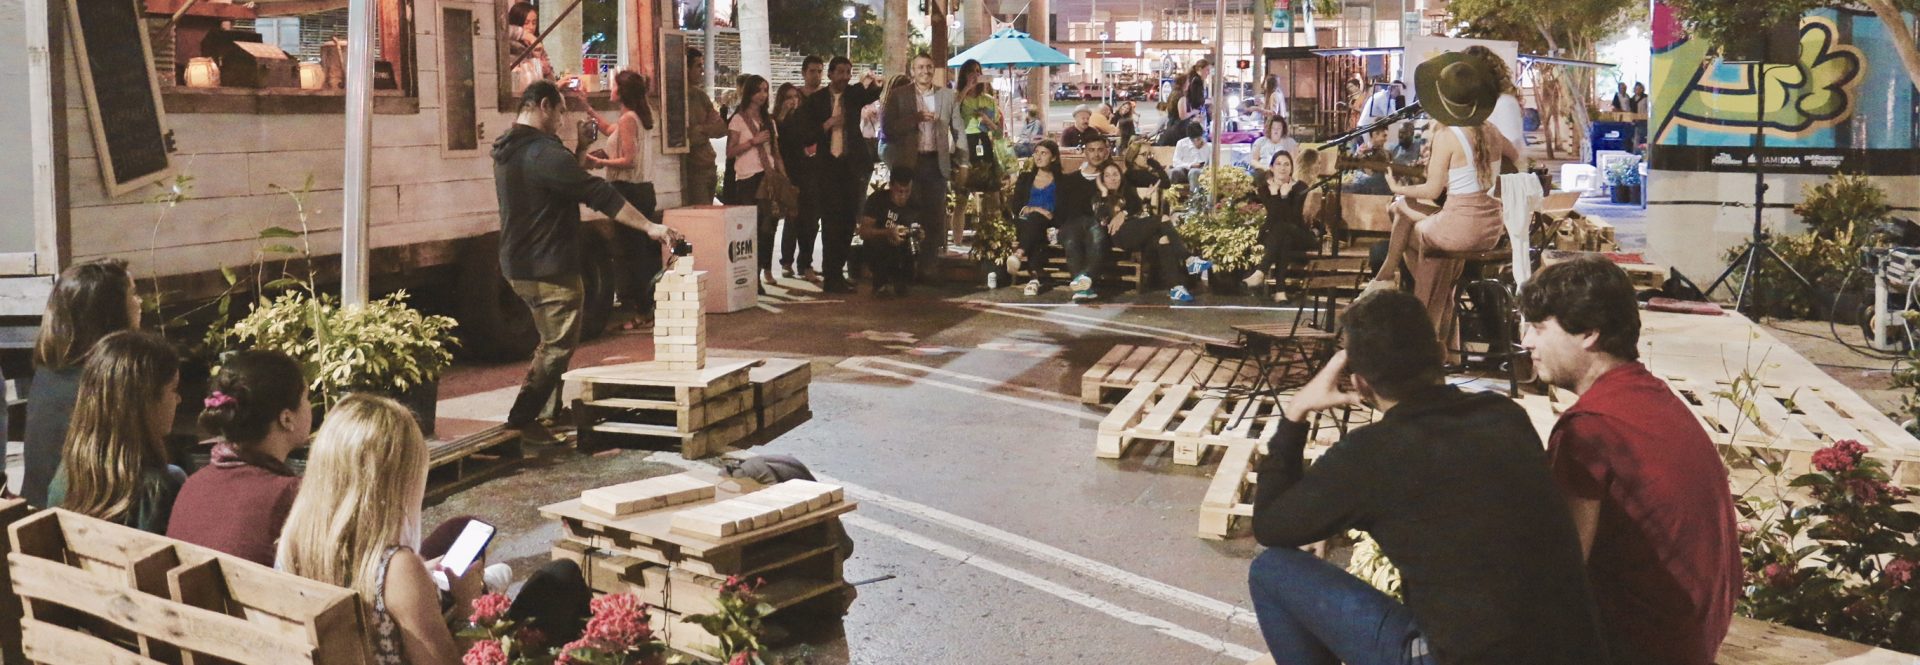 Planetizen Lists Tactical Urbanism As One of the Top 10 Planning Book for 2015